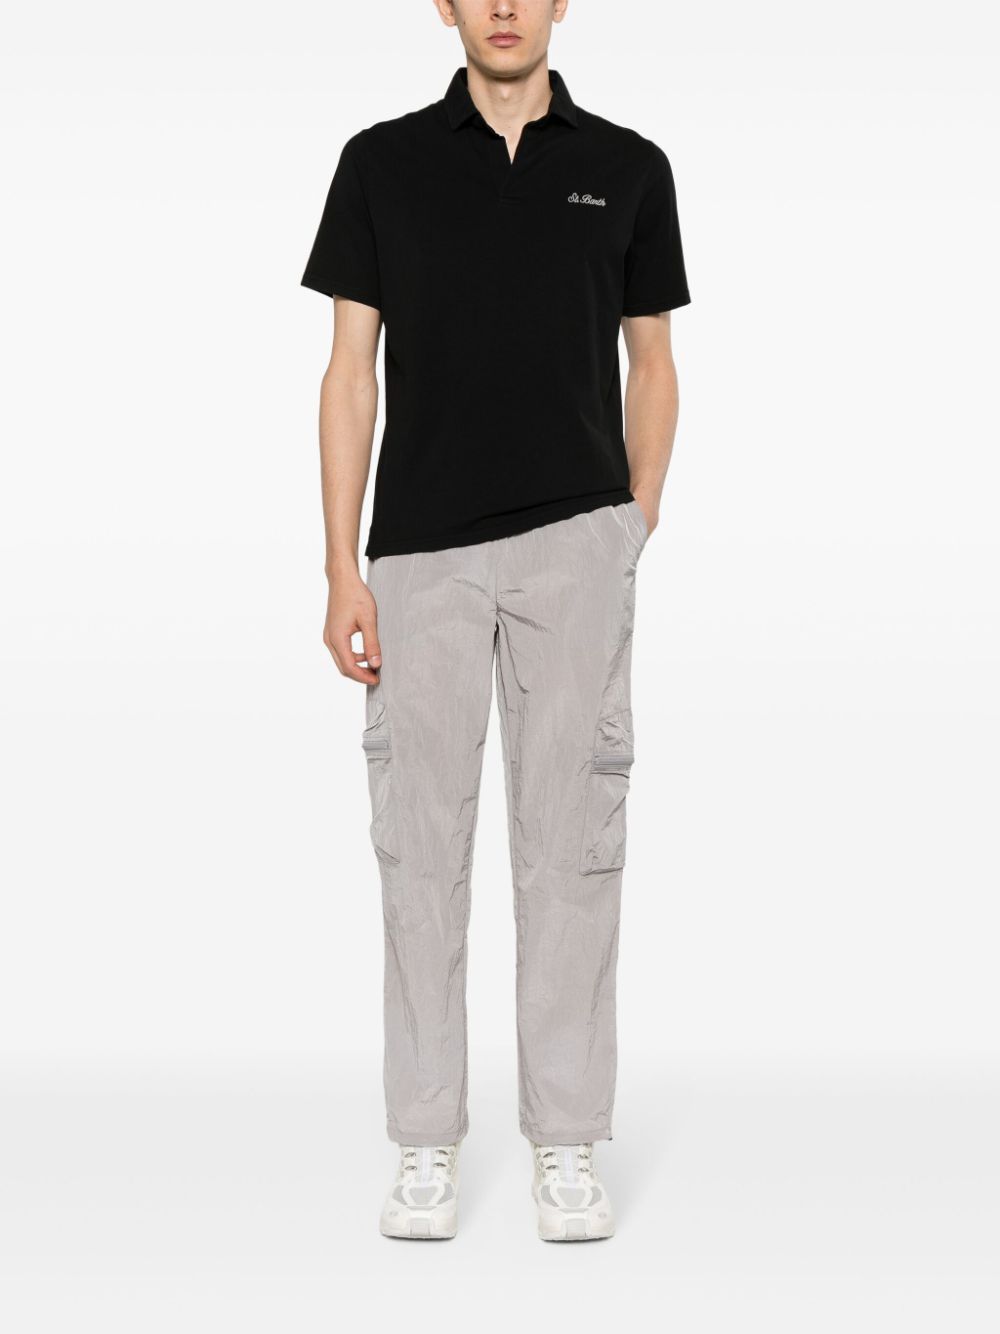 Kano gray trousers